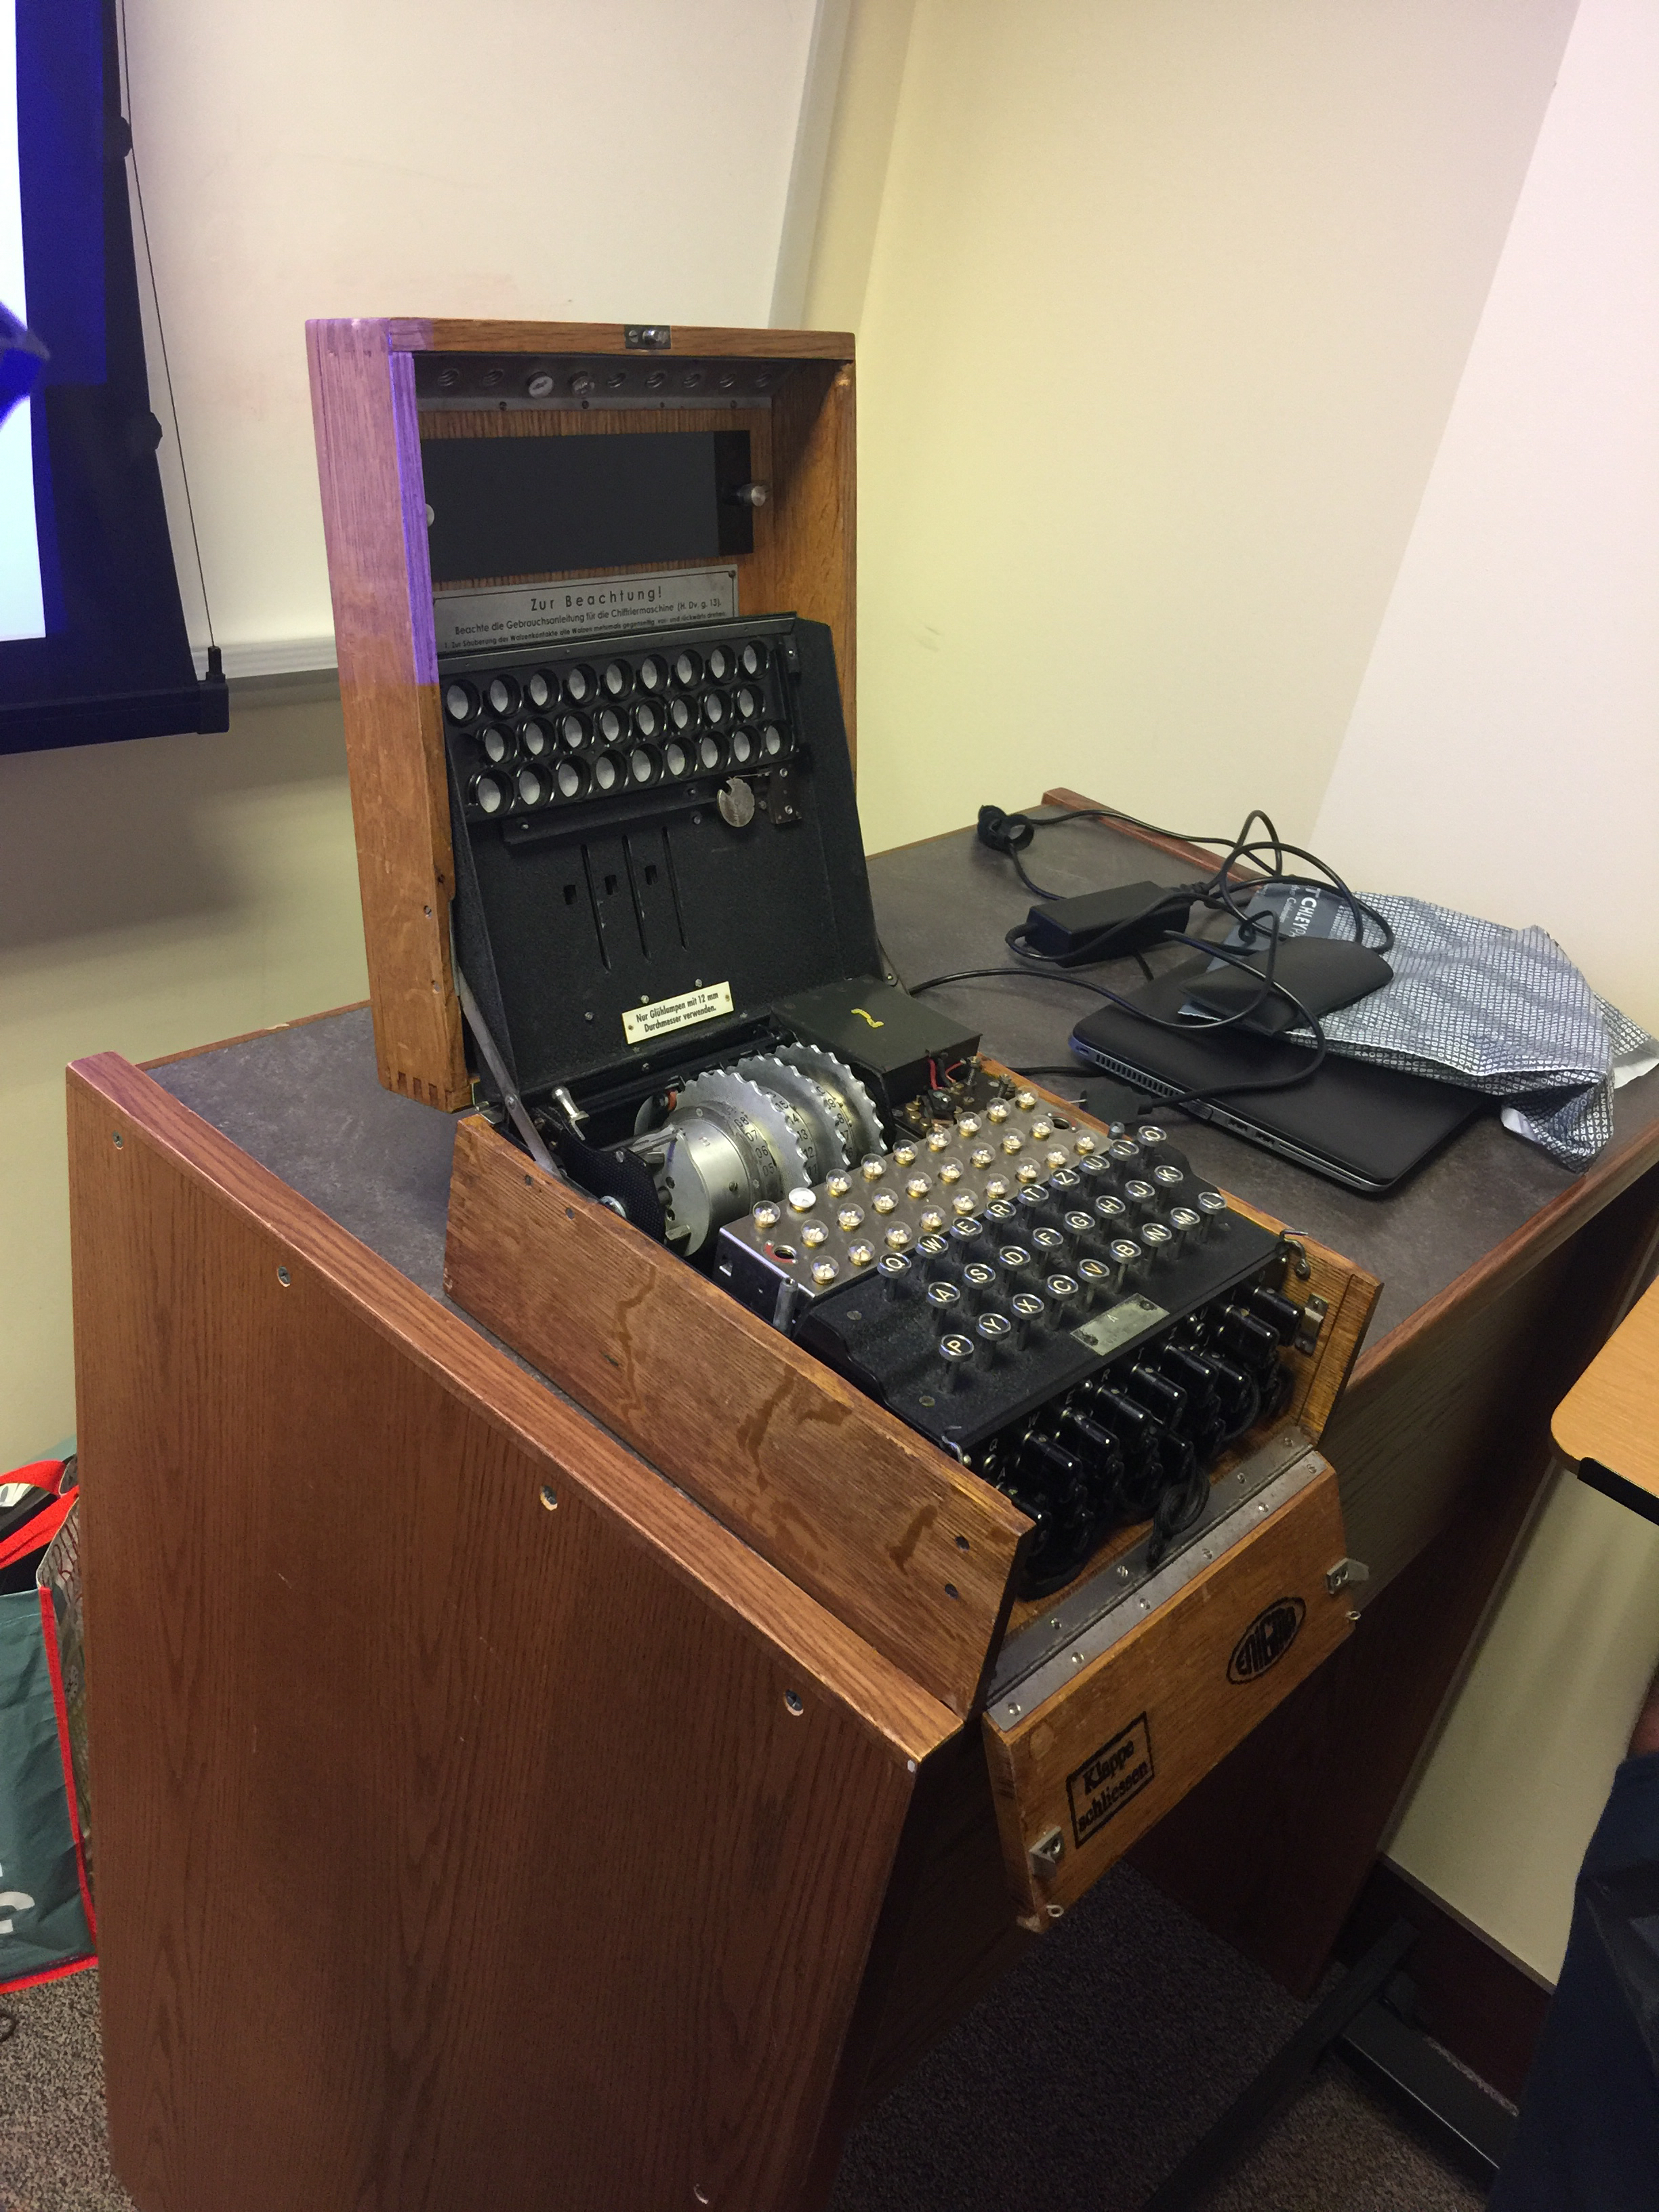 An old wooden enigma machine opened up, with the keyboard and rotors visible